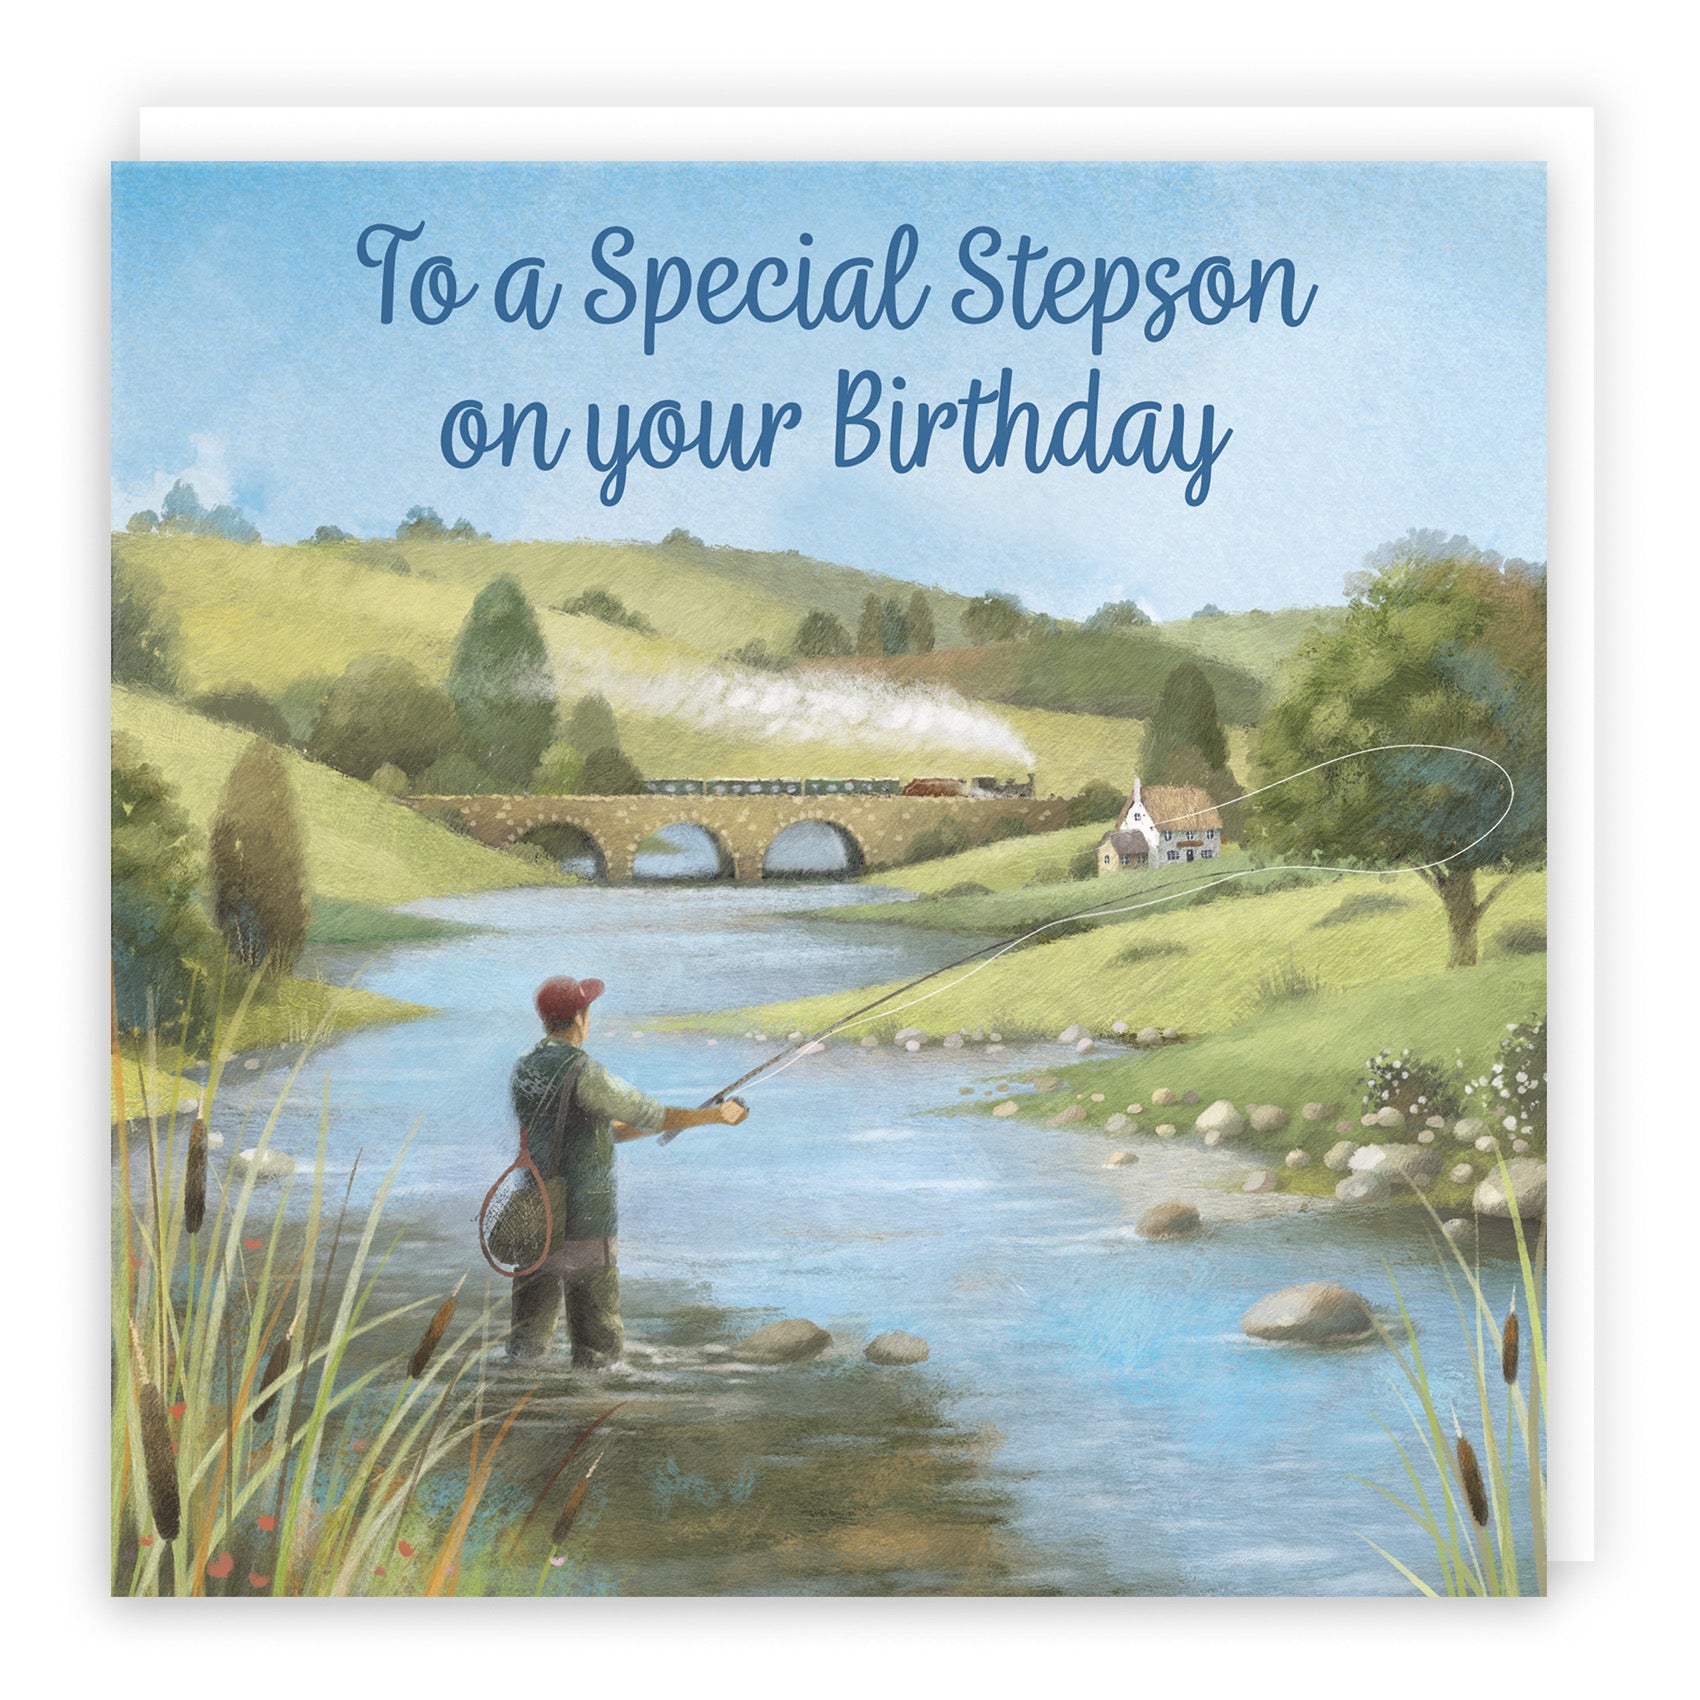 Stepson Fly Fishing Birthday Card Milo's Gallery - Default Title (B0CQWSRKZ8)